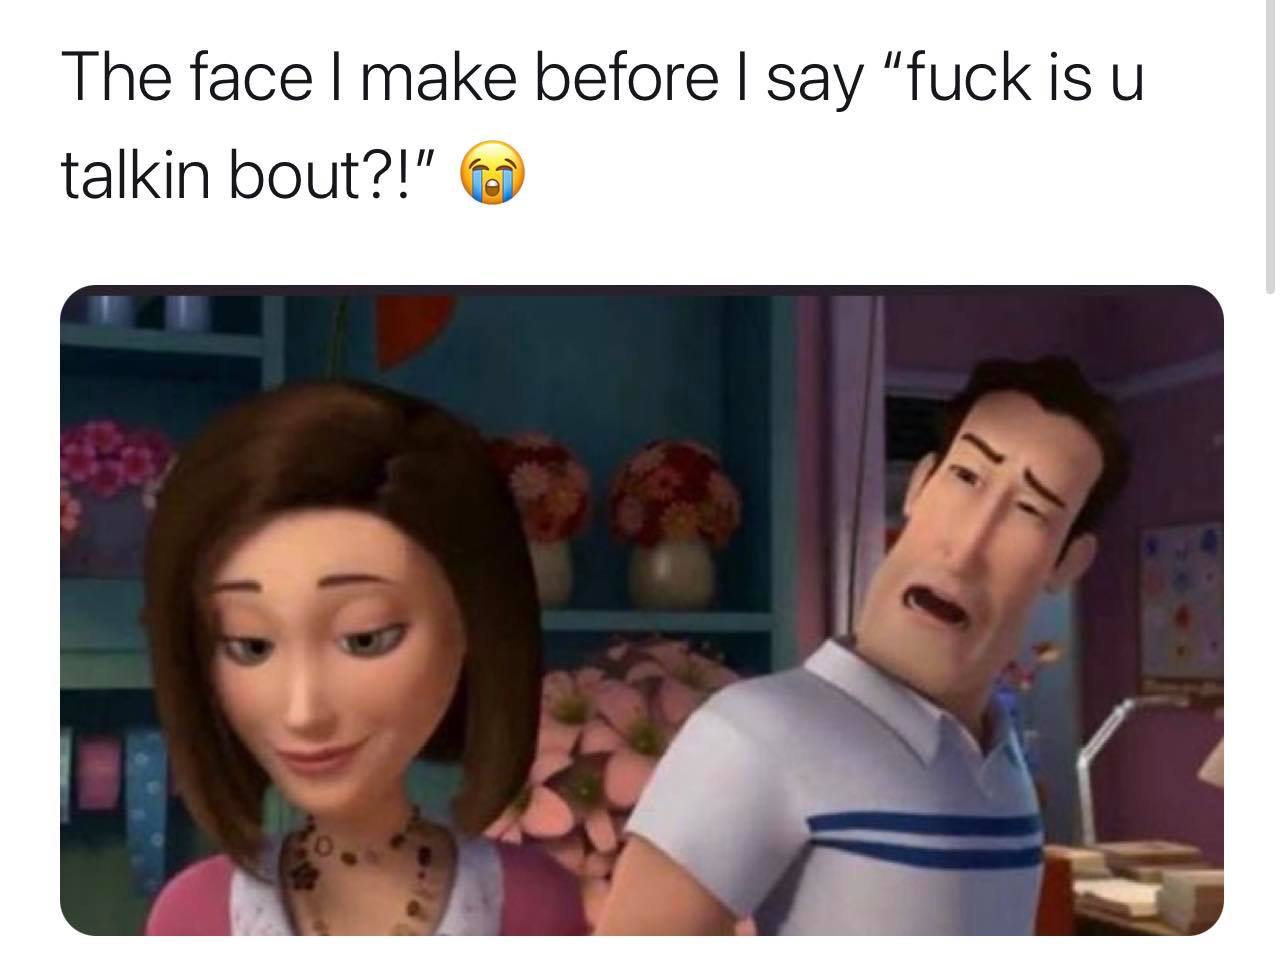 bee movie meme template - The face make before I say "fuck is u talkin bout?!"